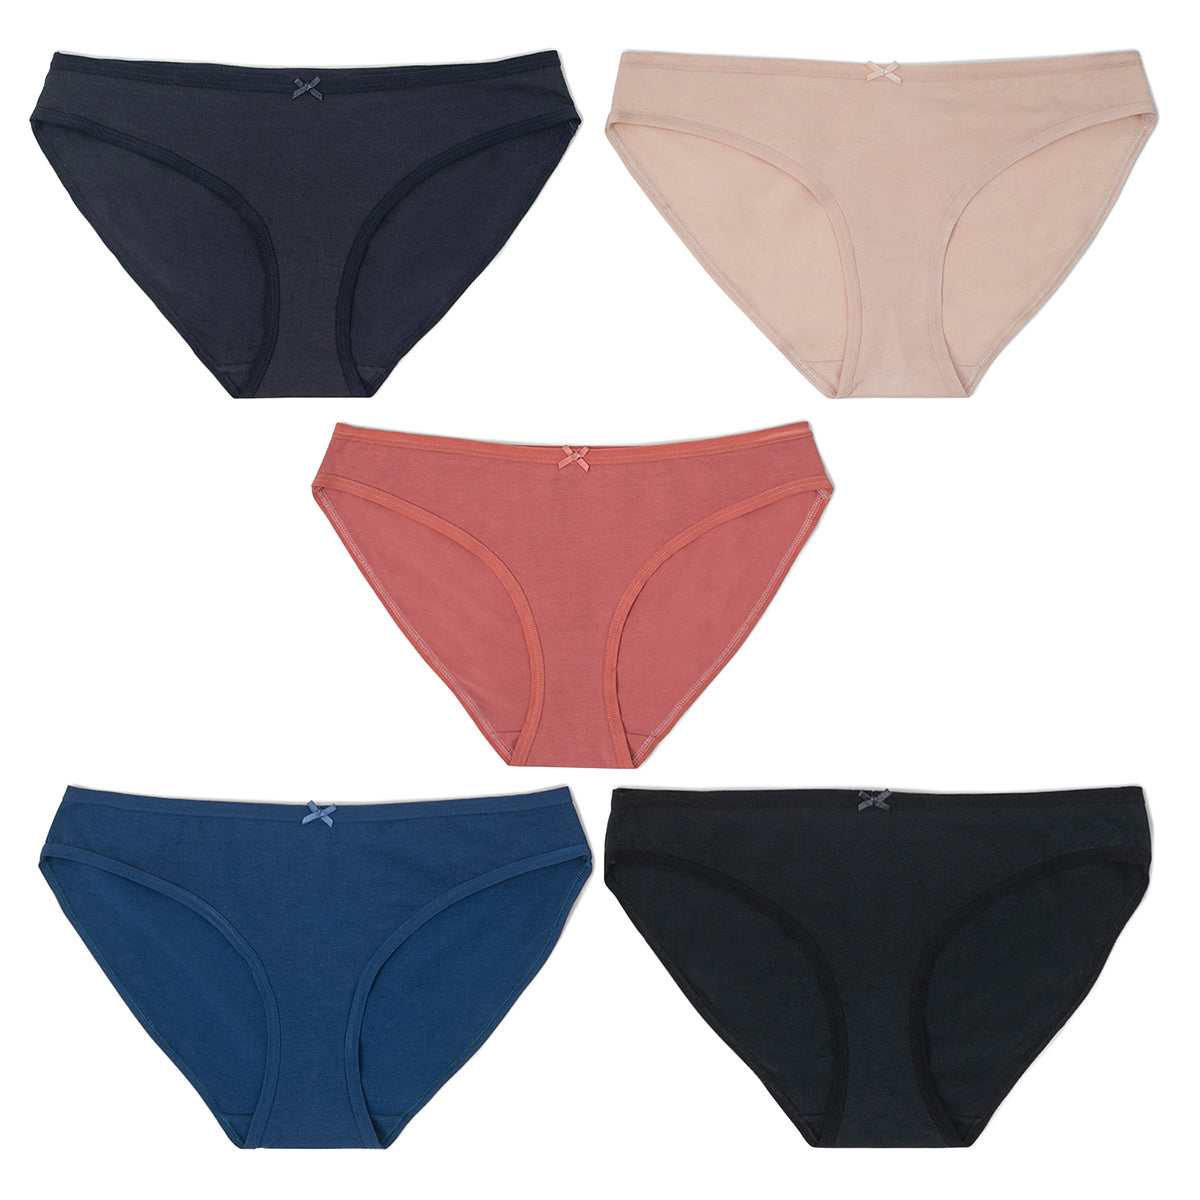 Pack Of 5 Low rise Bikini Cotton Stretch Full Rear Coverage Panty -NYP039-Multi colour